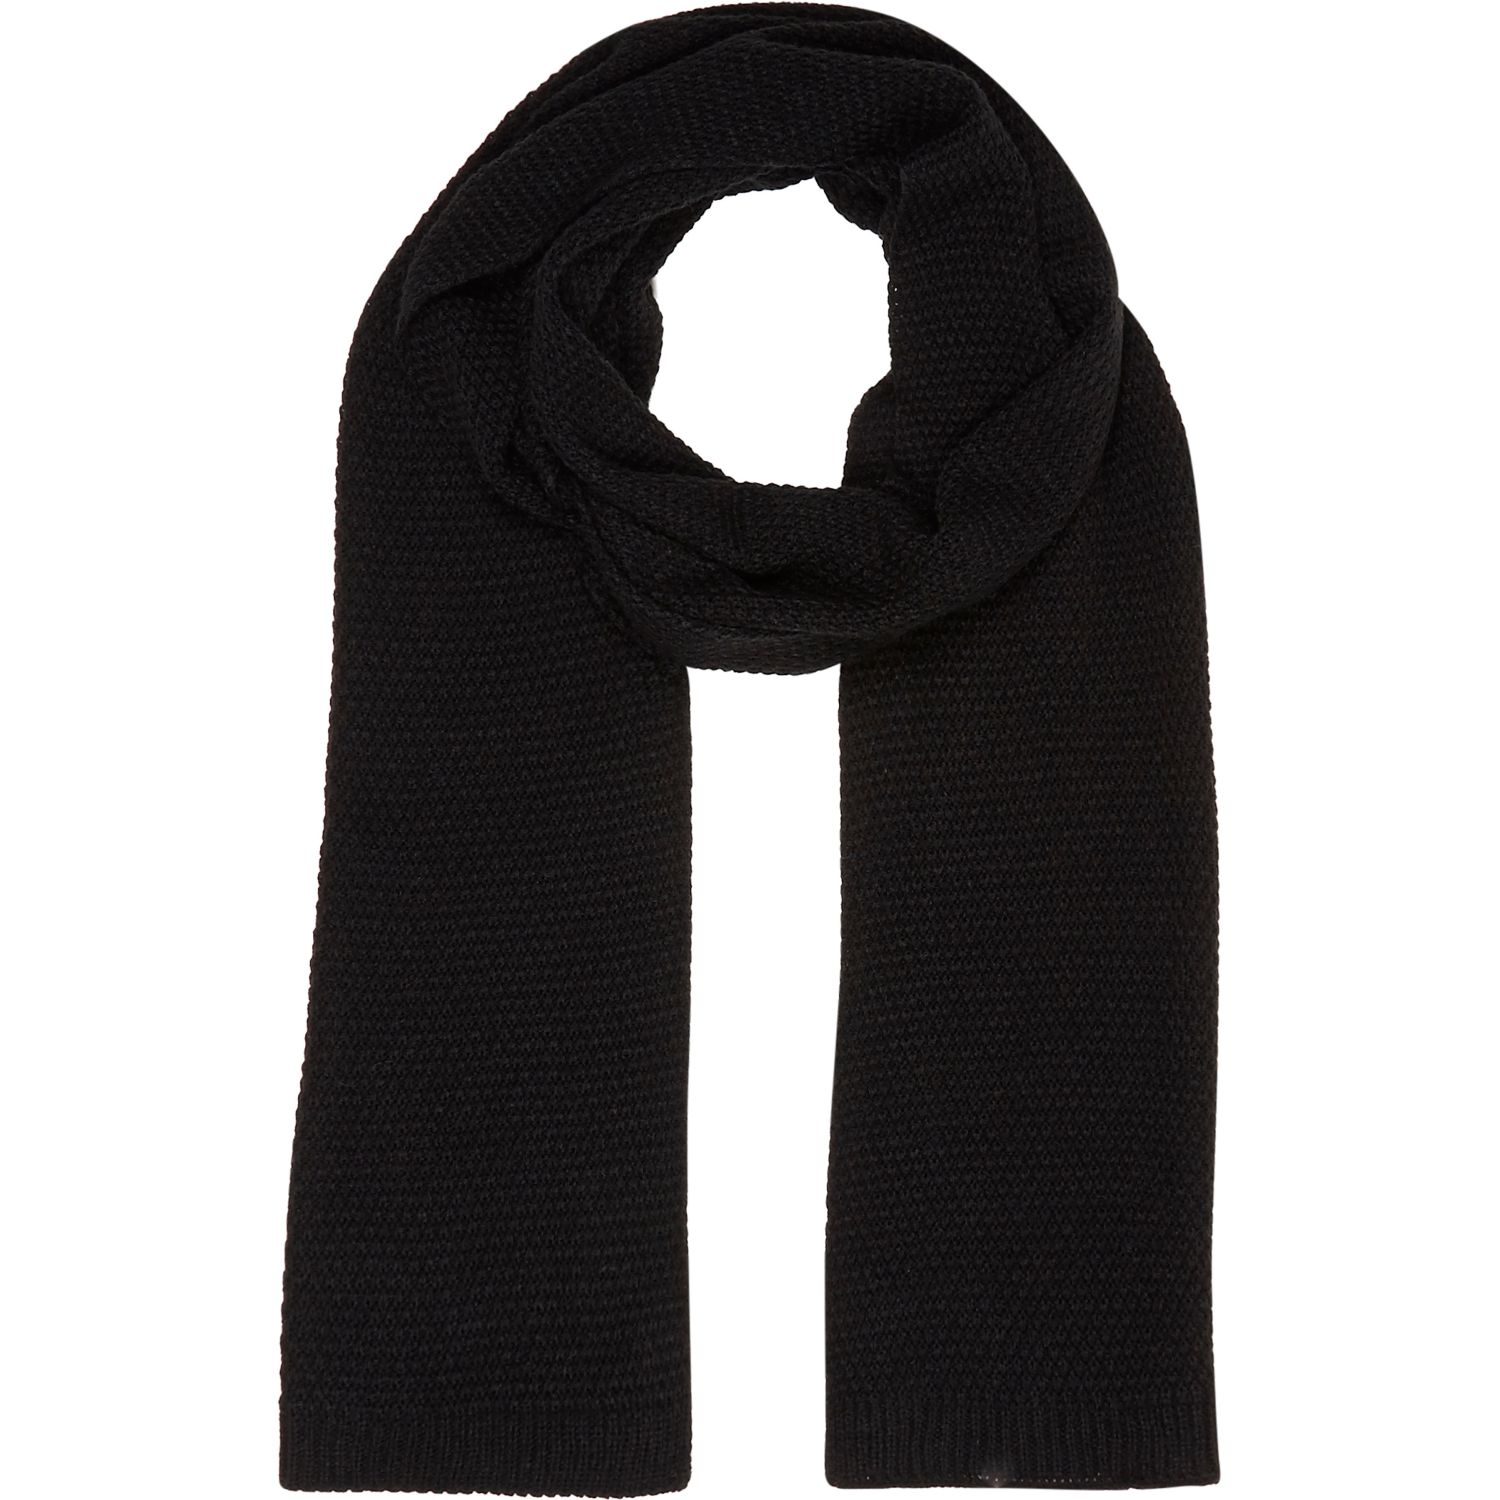 Lyst - River Island Black Knitted Scarf in Black for Men